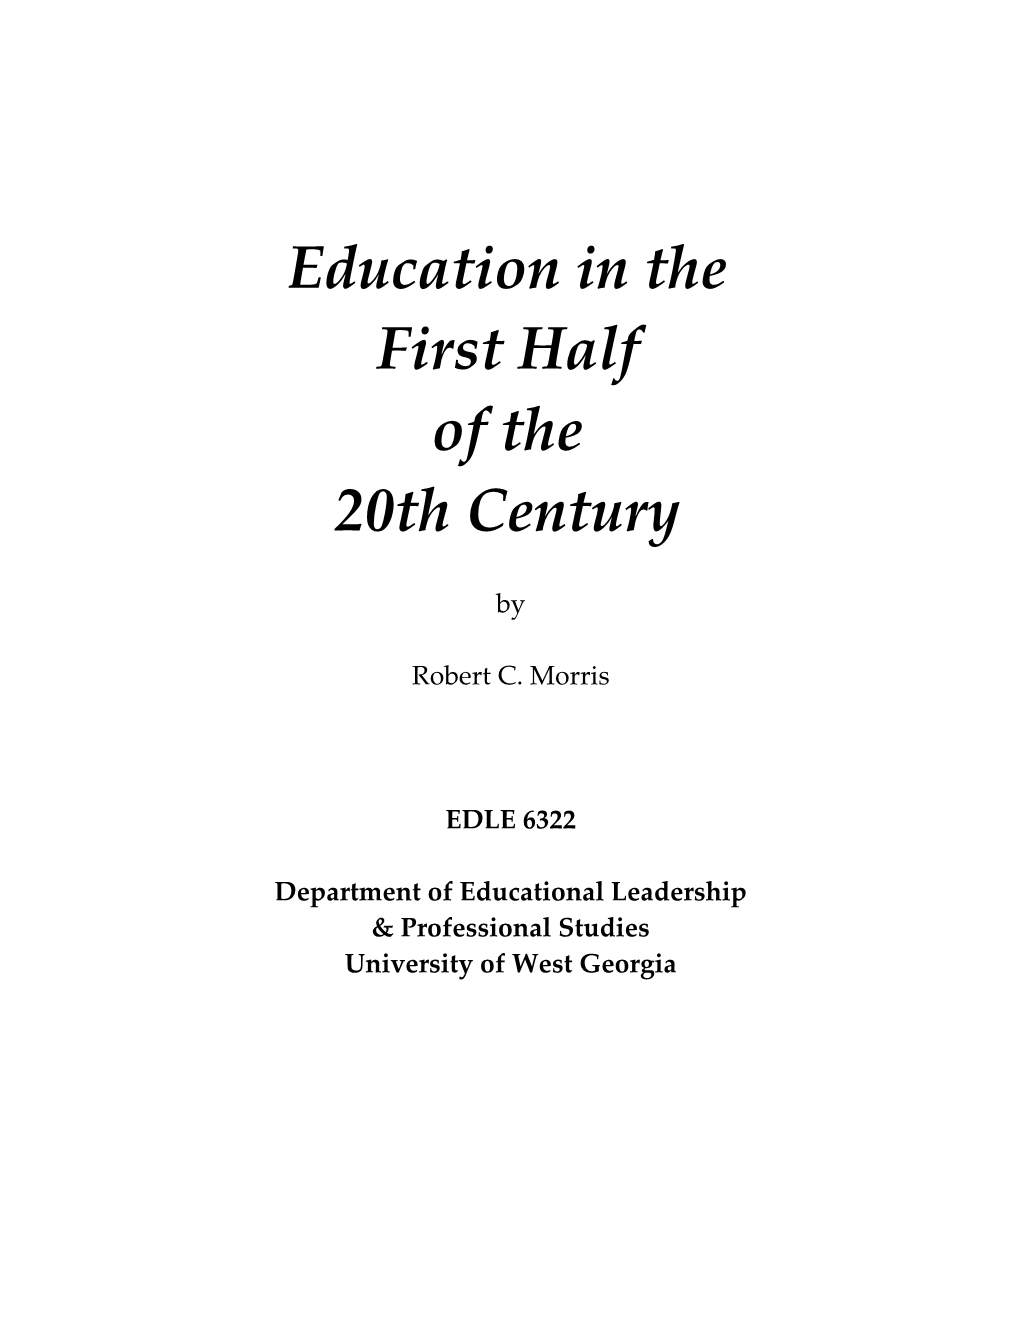 Education in the First Half